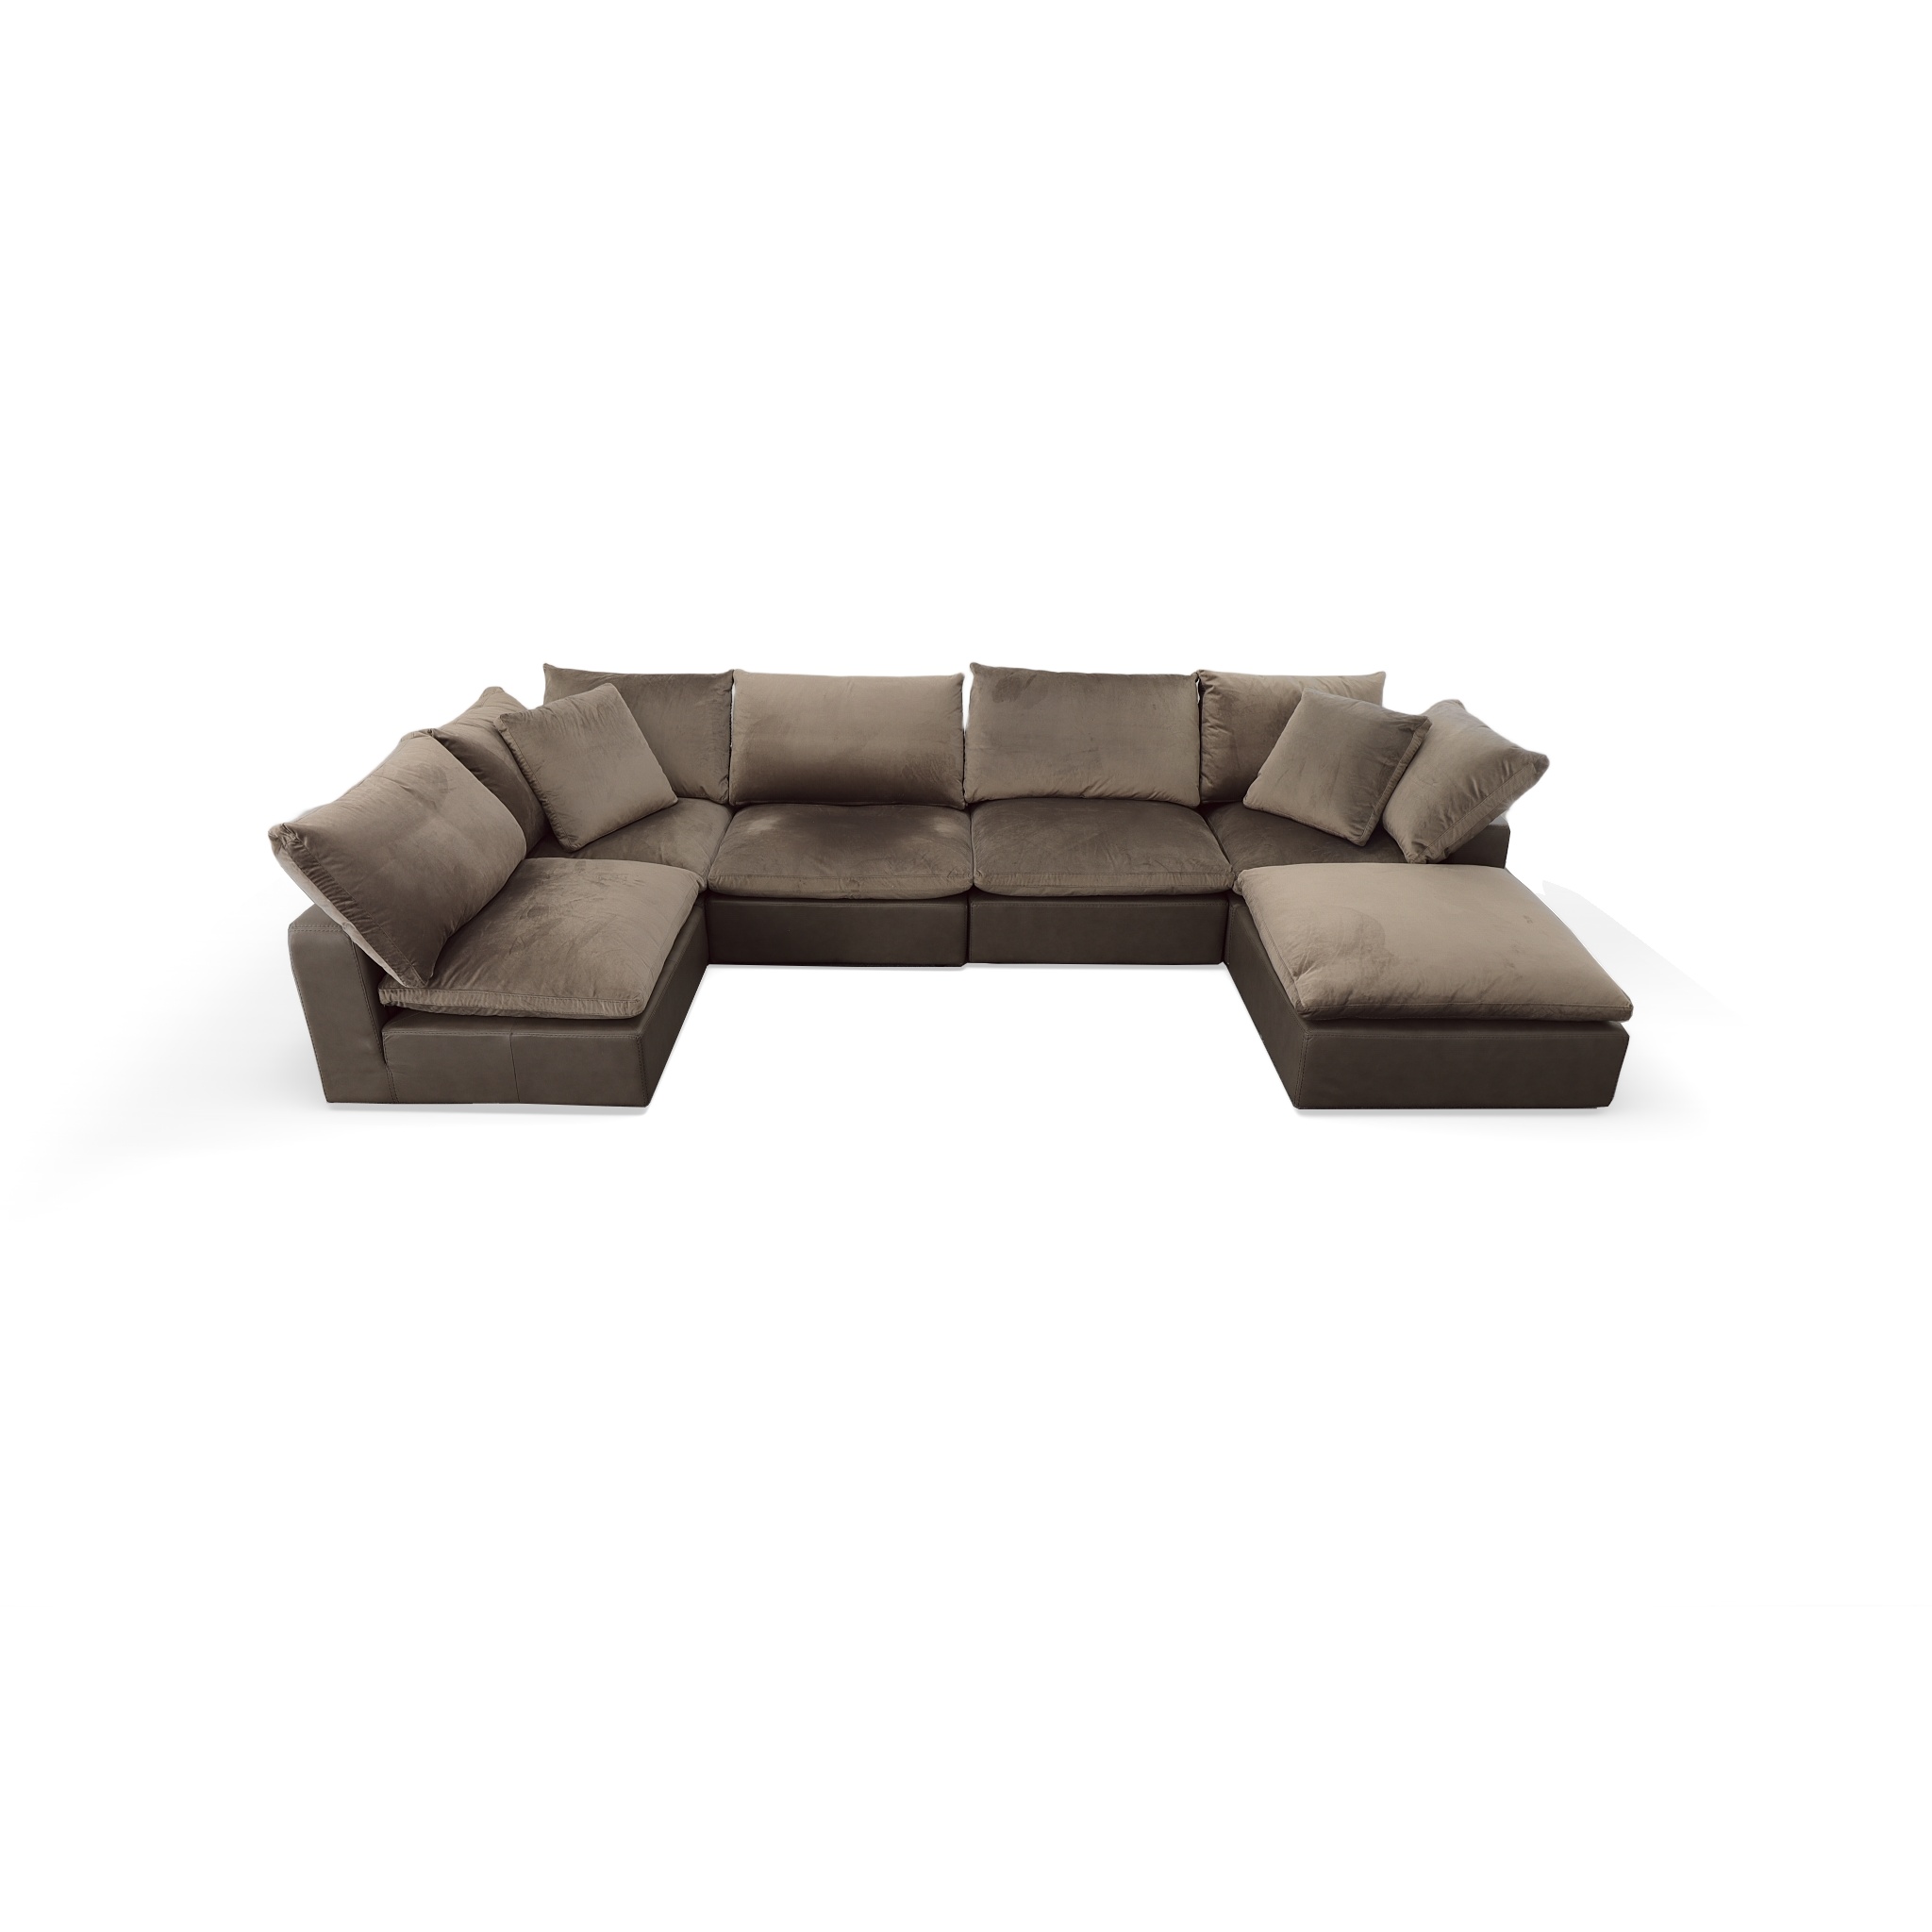 Rocco Leather Sectional 6-Piece